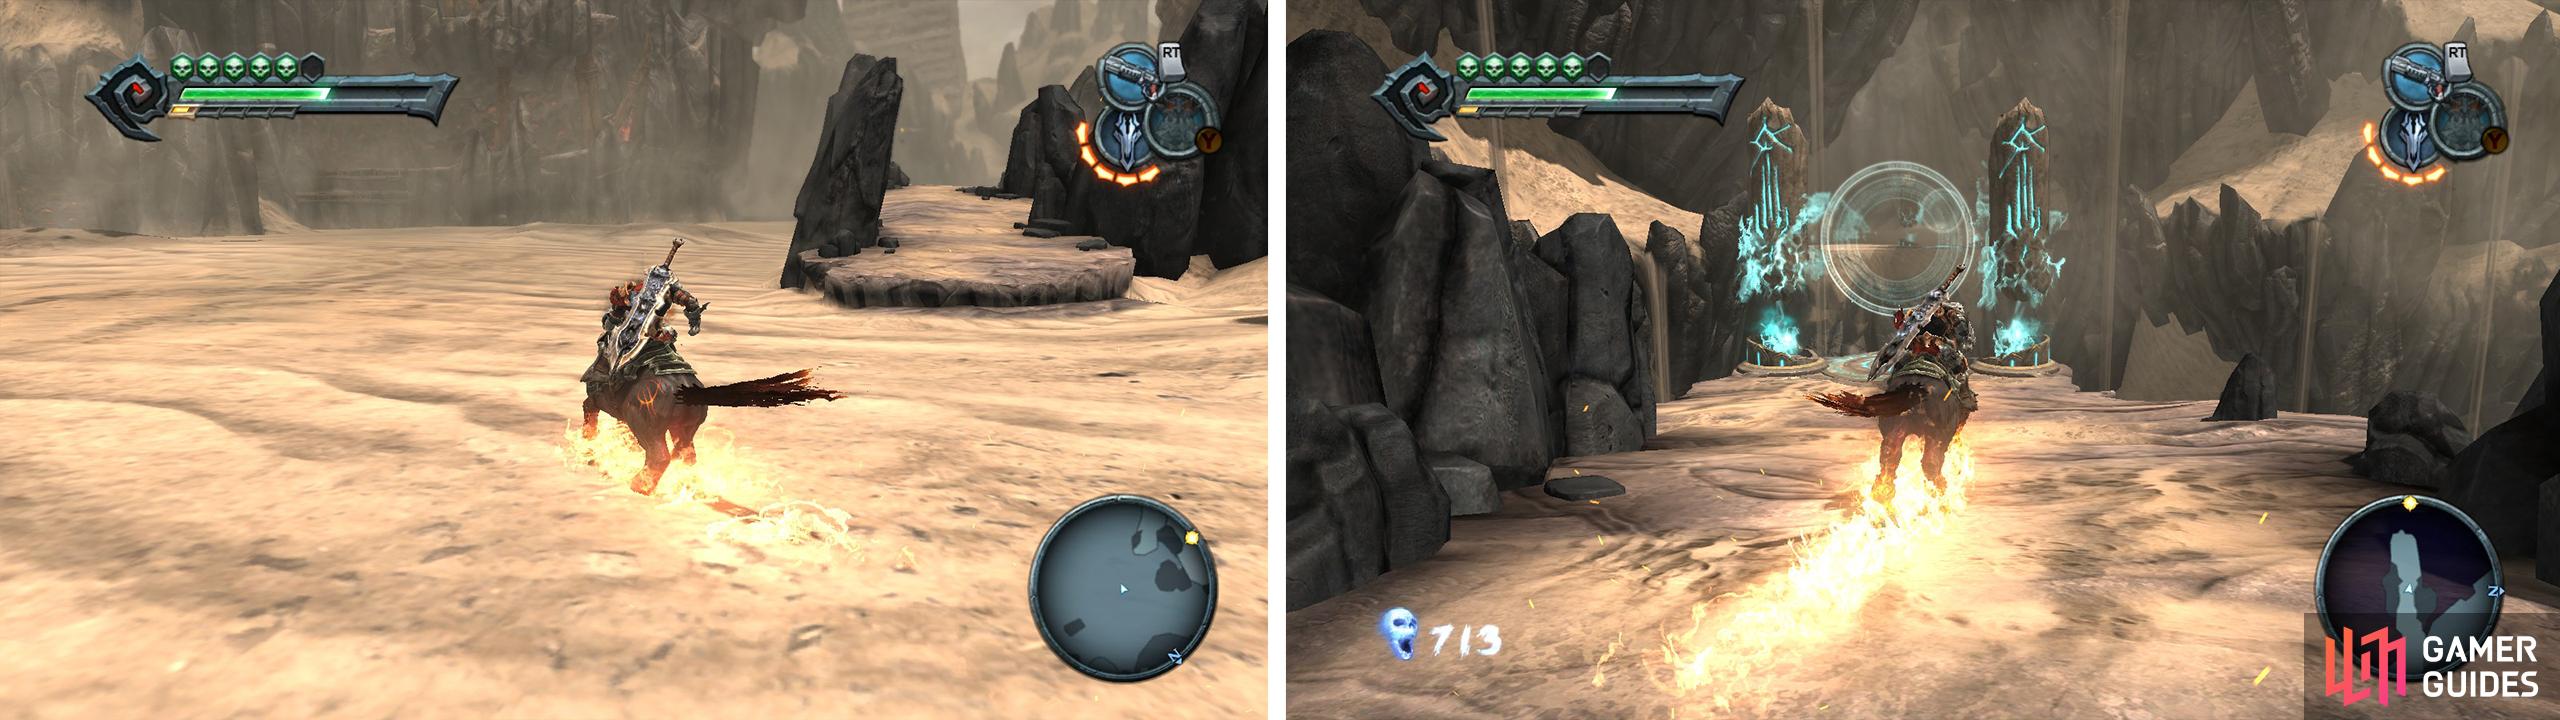 Follow this rocky platform (left) to the end and use the Soul Bridge (right).